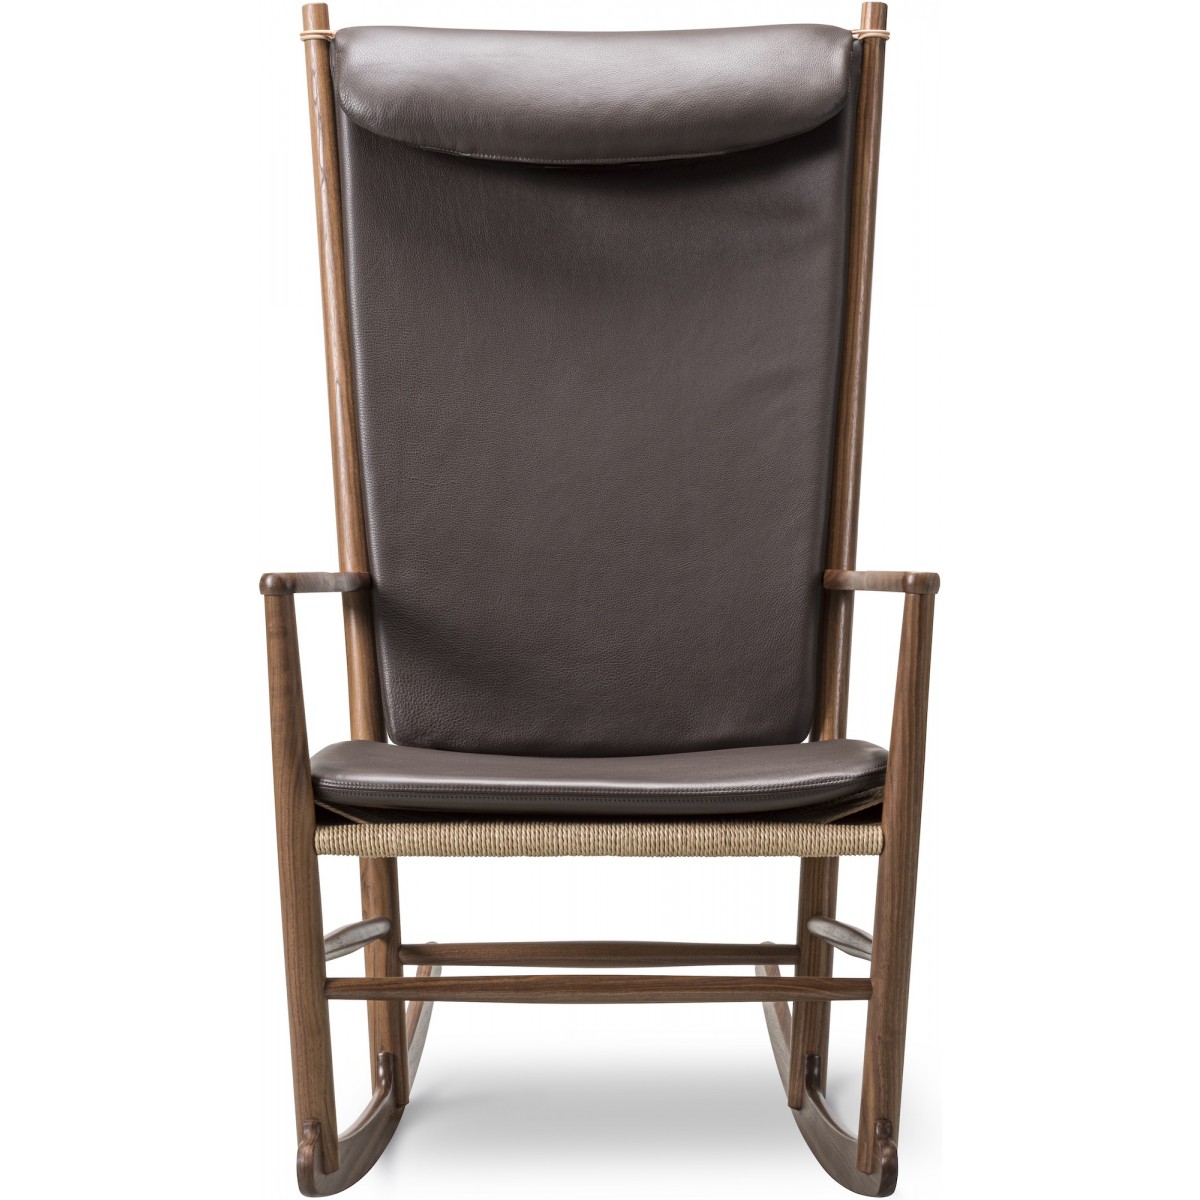 Appuie tête & Coussin d’assise & Coussin dorsal – Cuir Primo 86-1 – Rocking chair J16